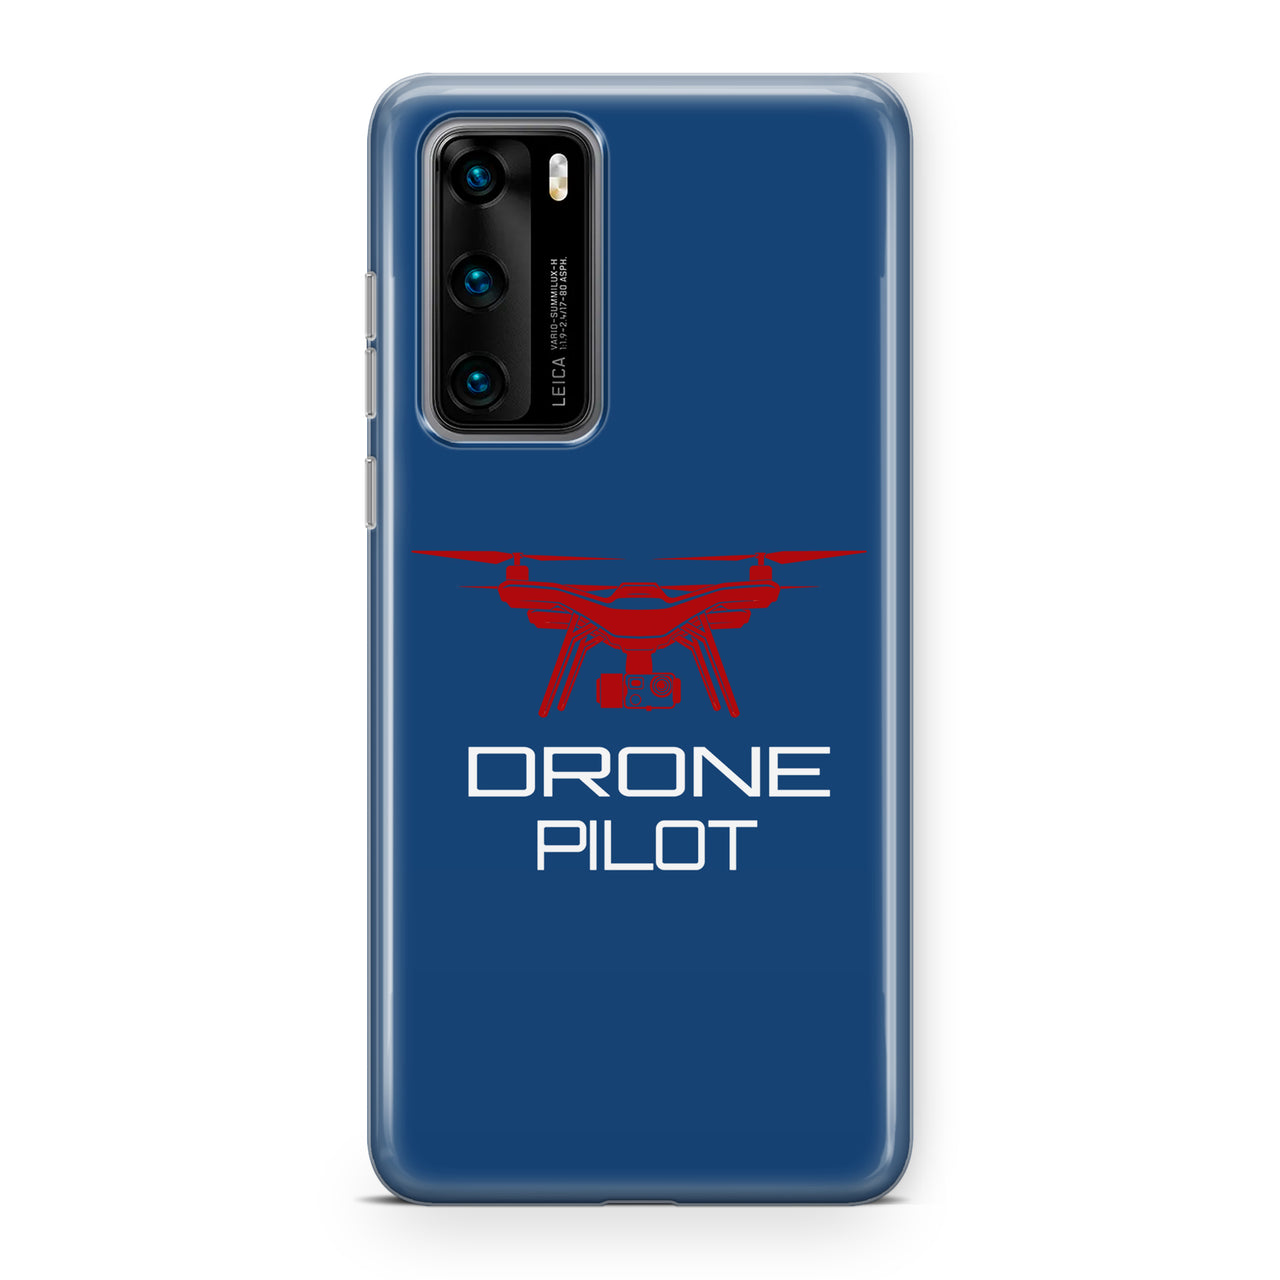 Drone Pilot Designed Huawei Cases